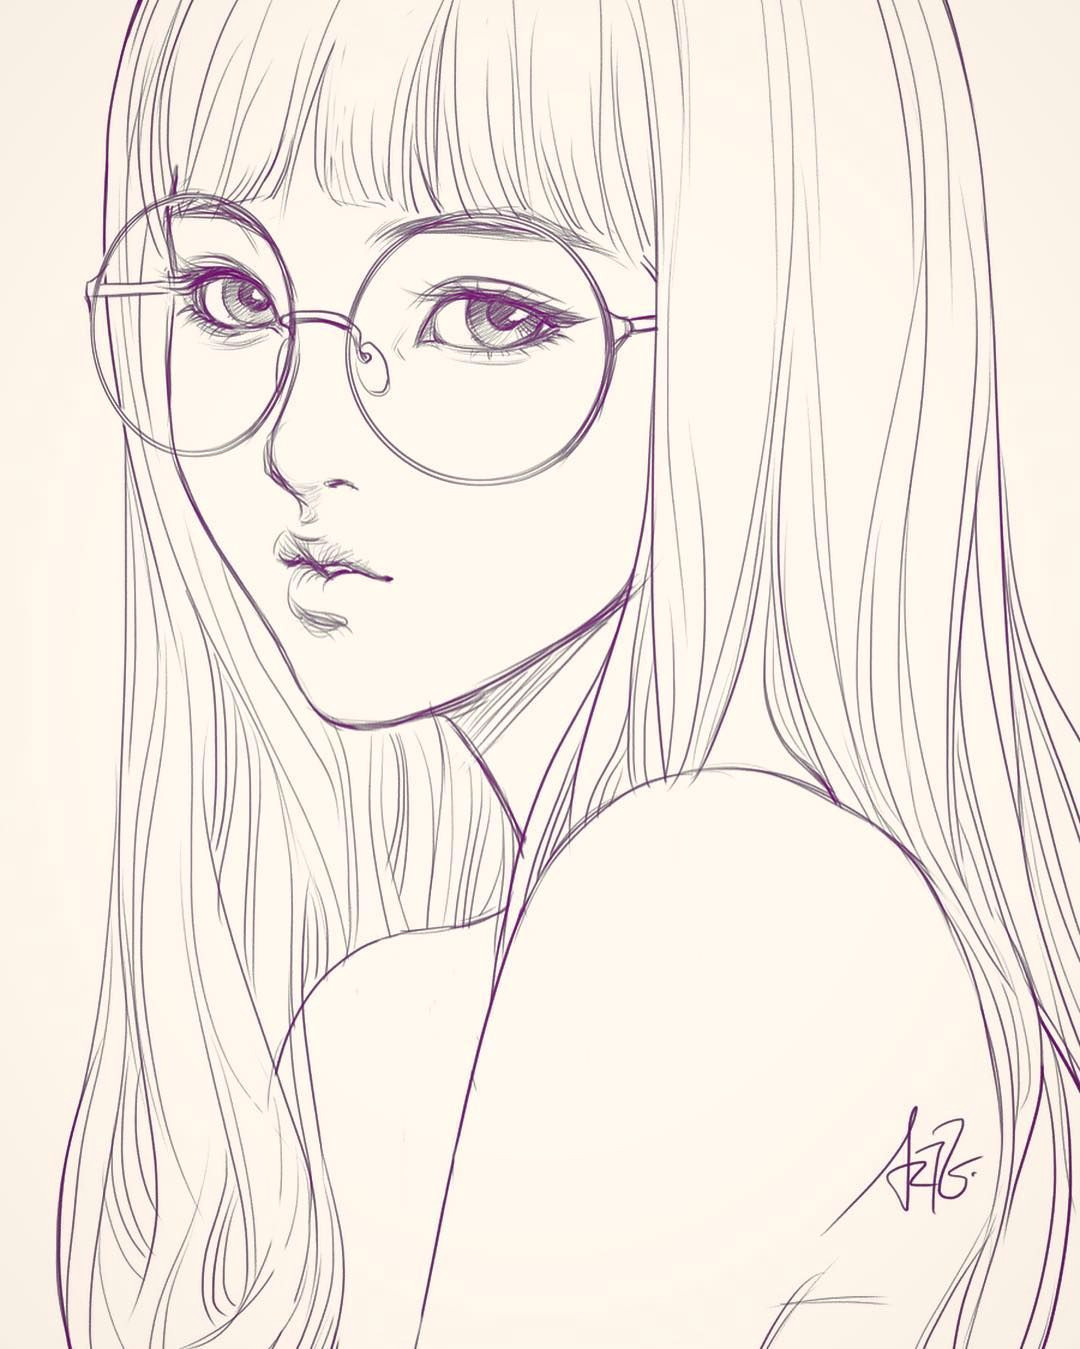 Drawings Of Girls with Glasses Last Sketch Of Girl with Glasses Having Bad Backache It Hurts